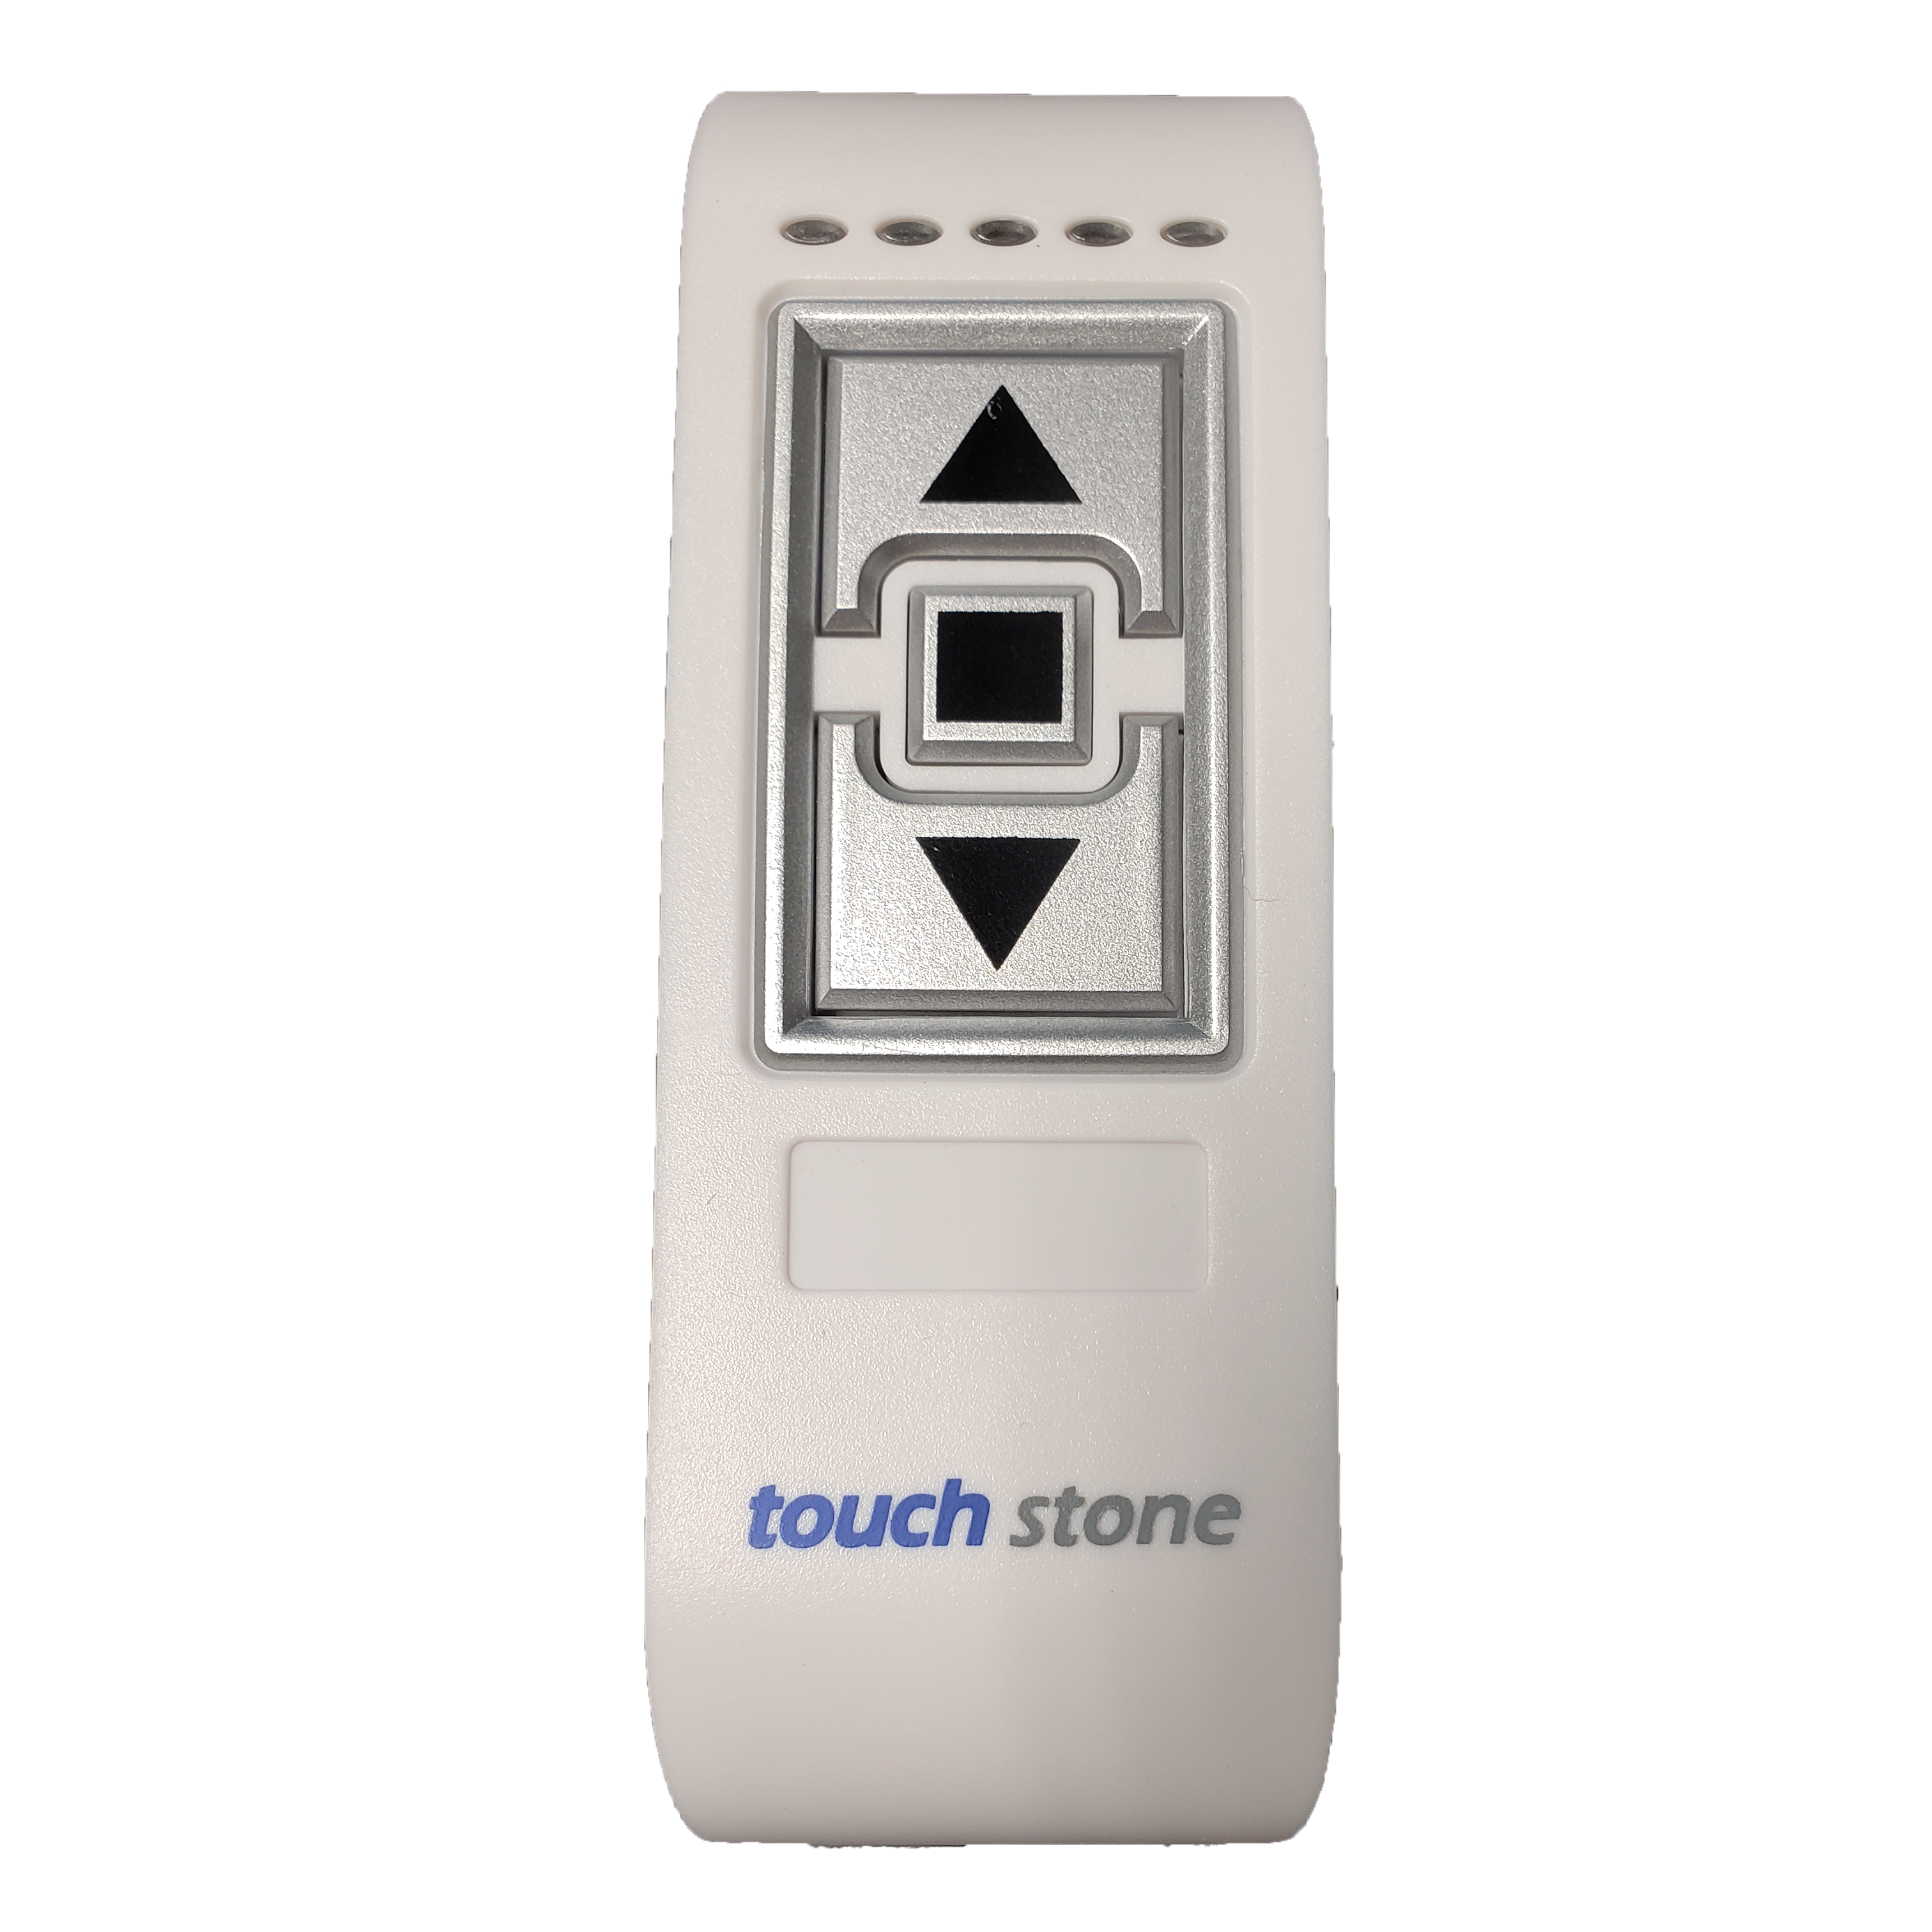 23202 Whisper Lift II Remote - Touchstone Home Products, Inc.